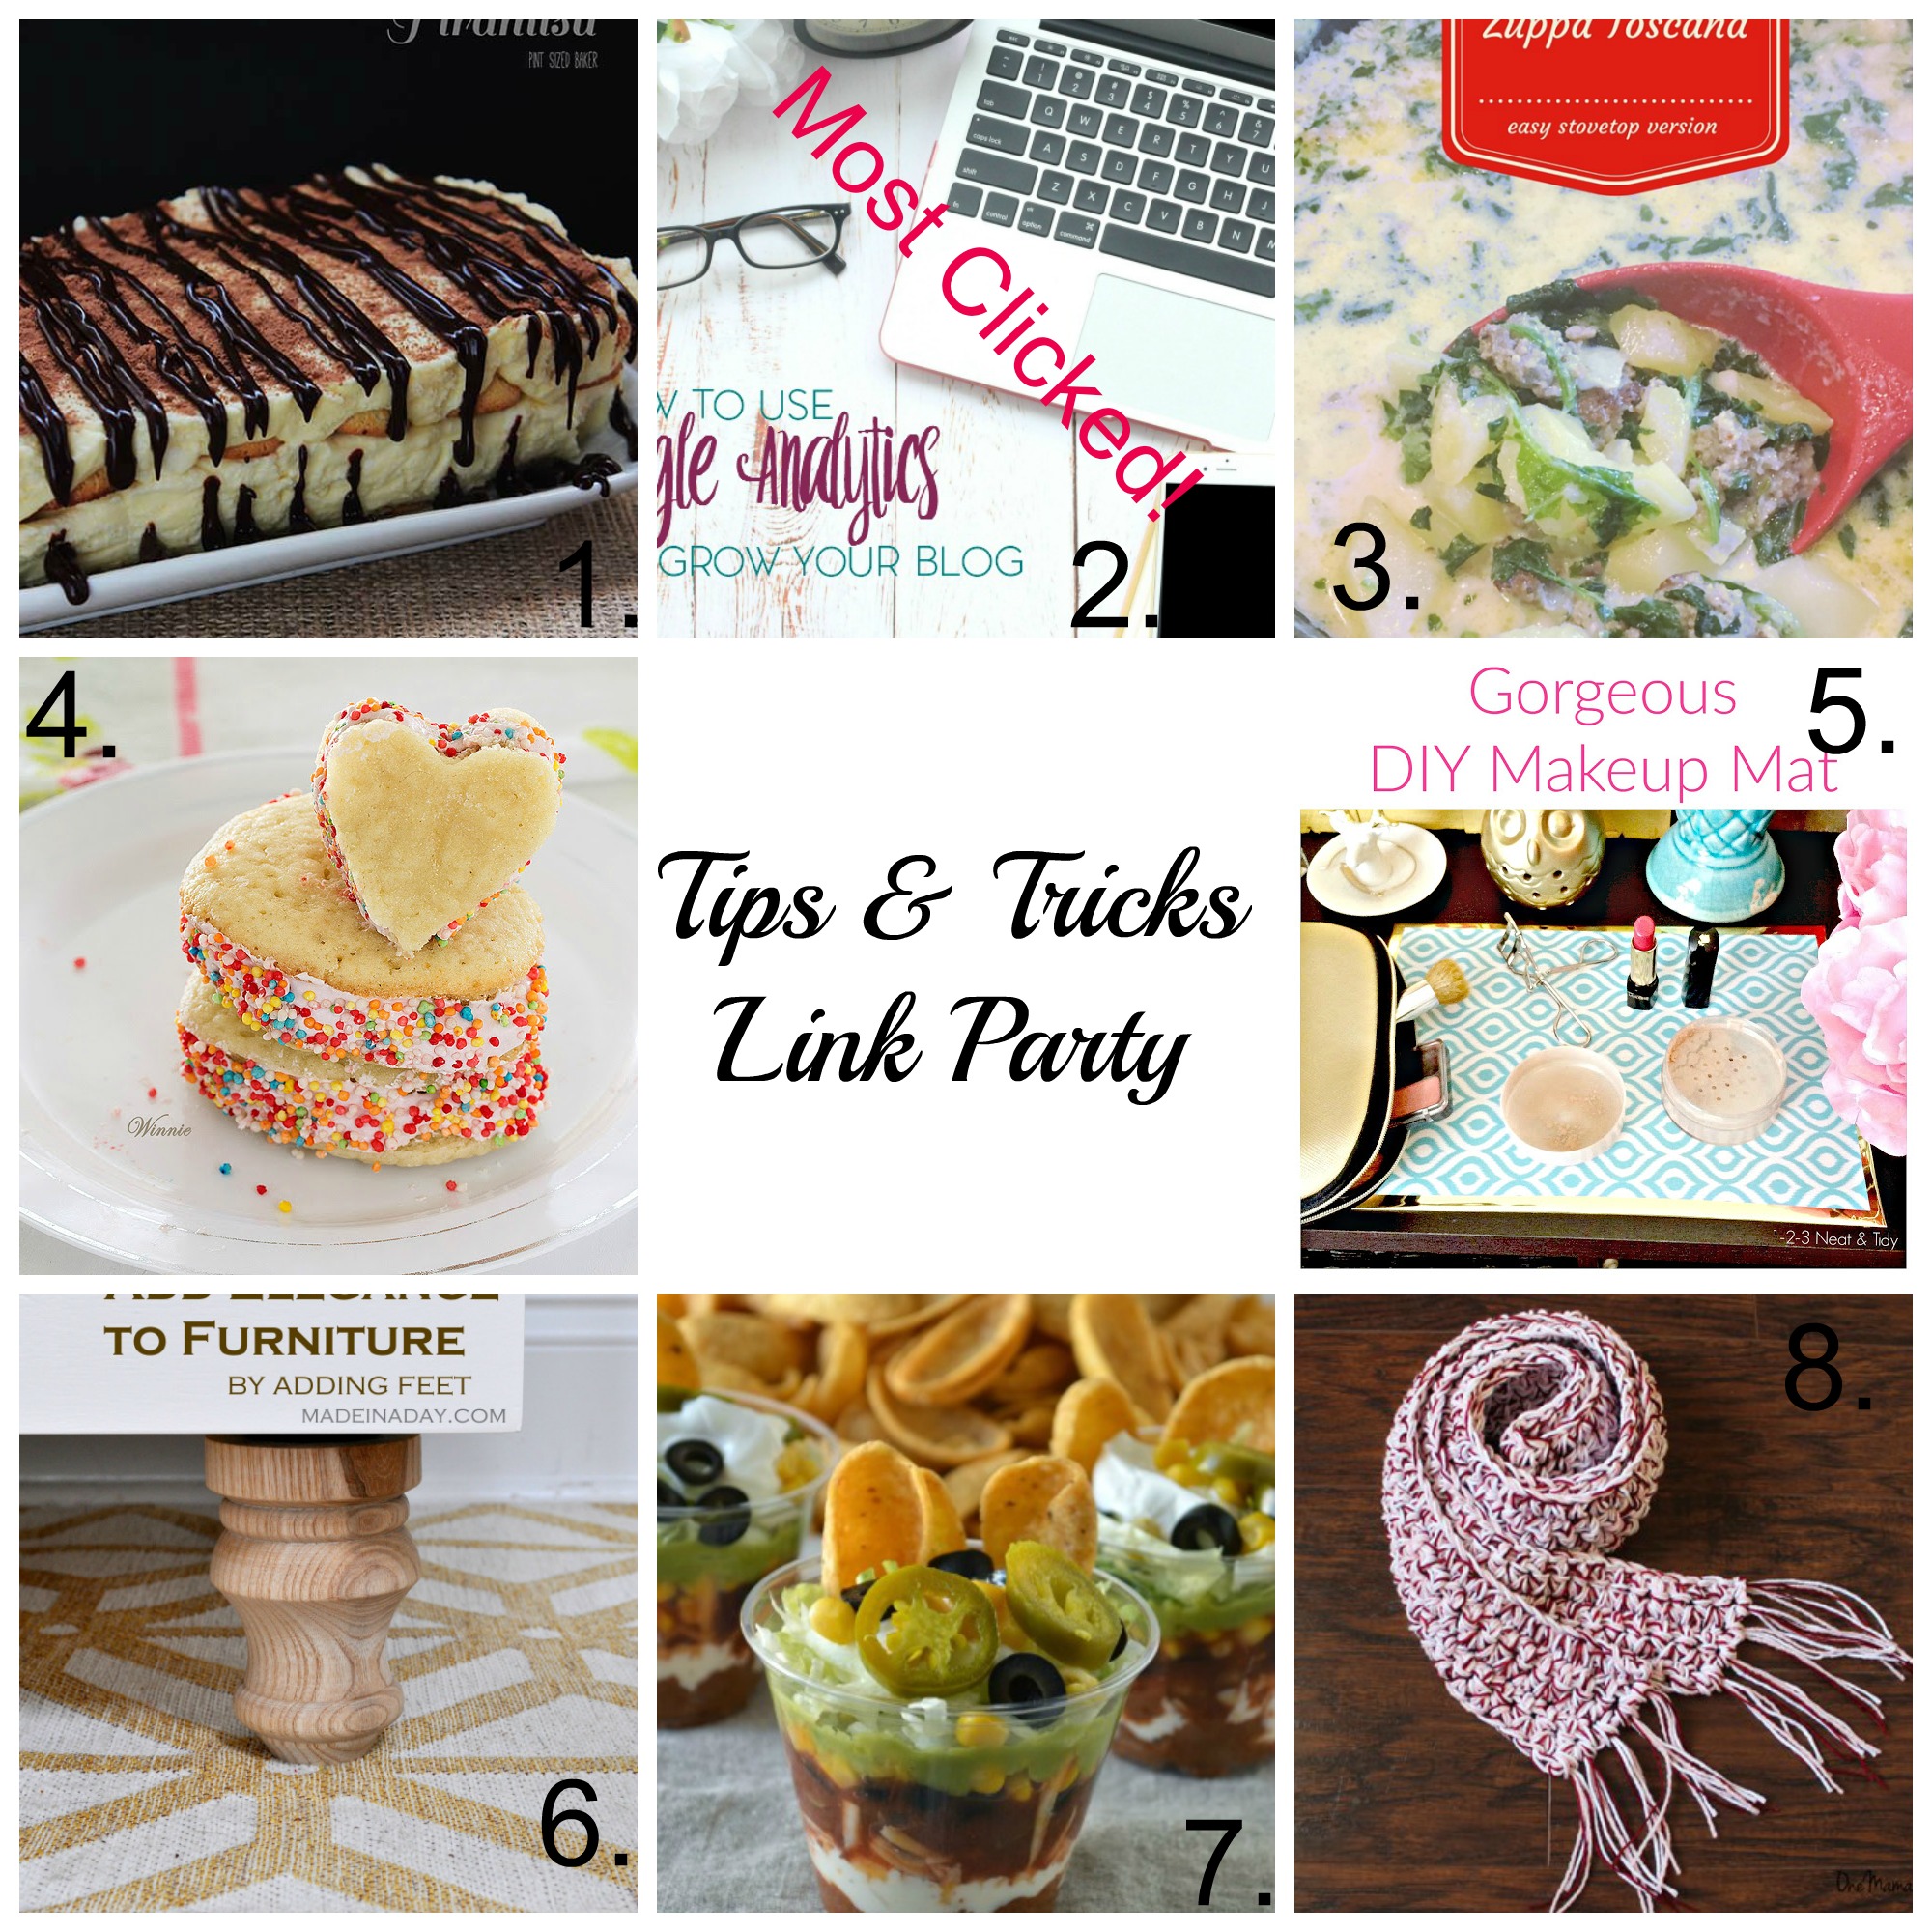 Tips and Tricks #53 Link Party #linkparty #linkup #tipsandtricks